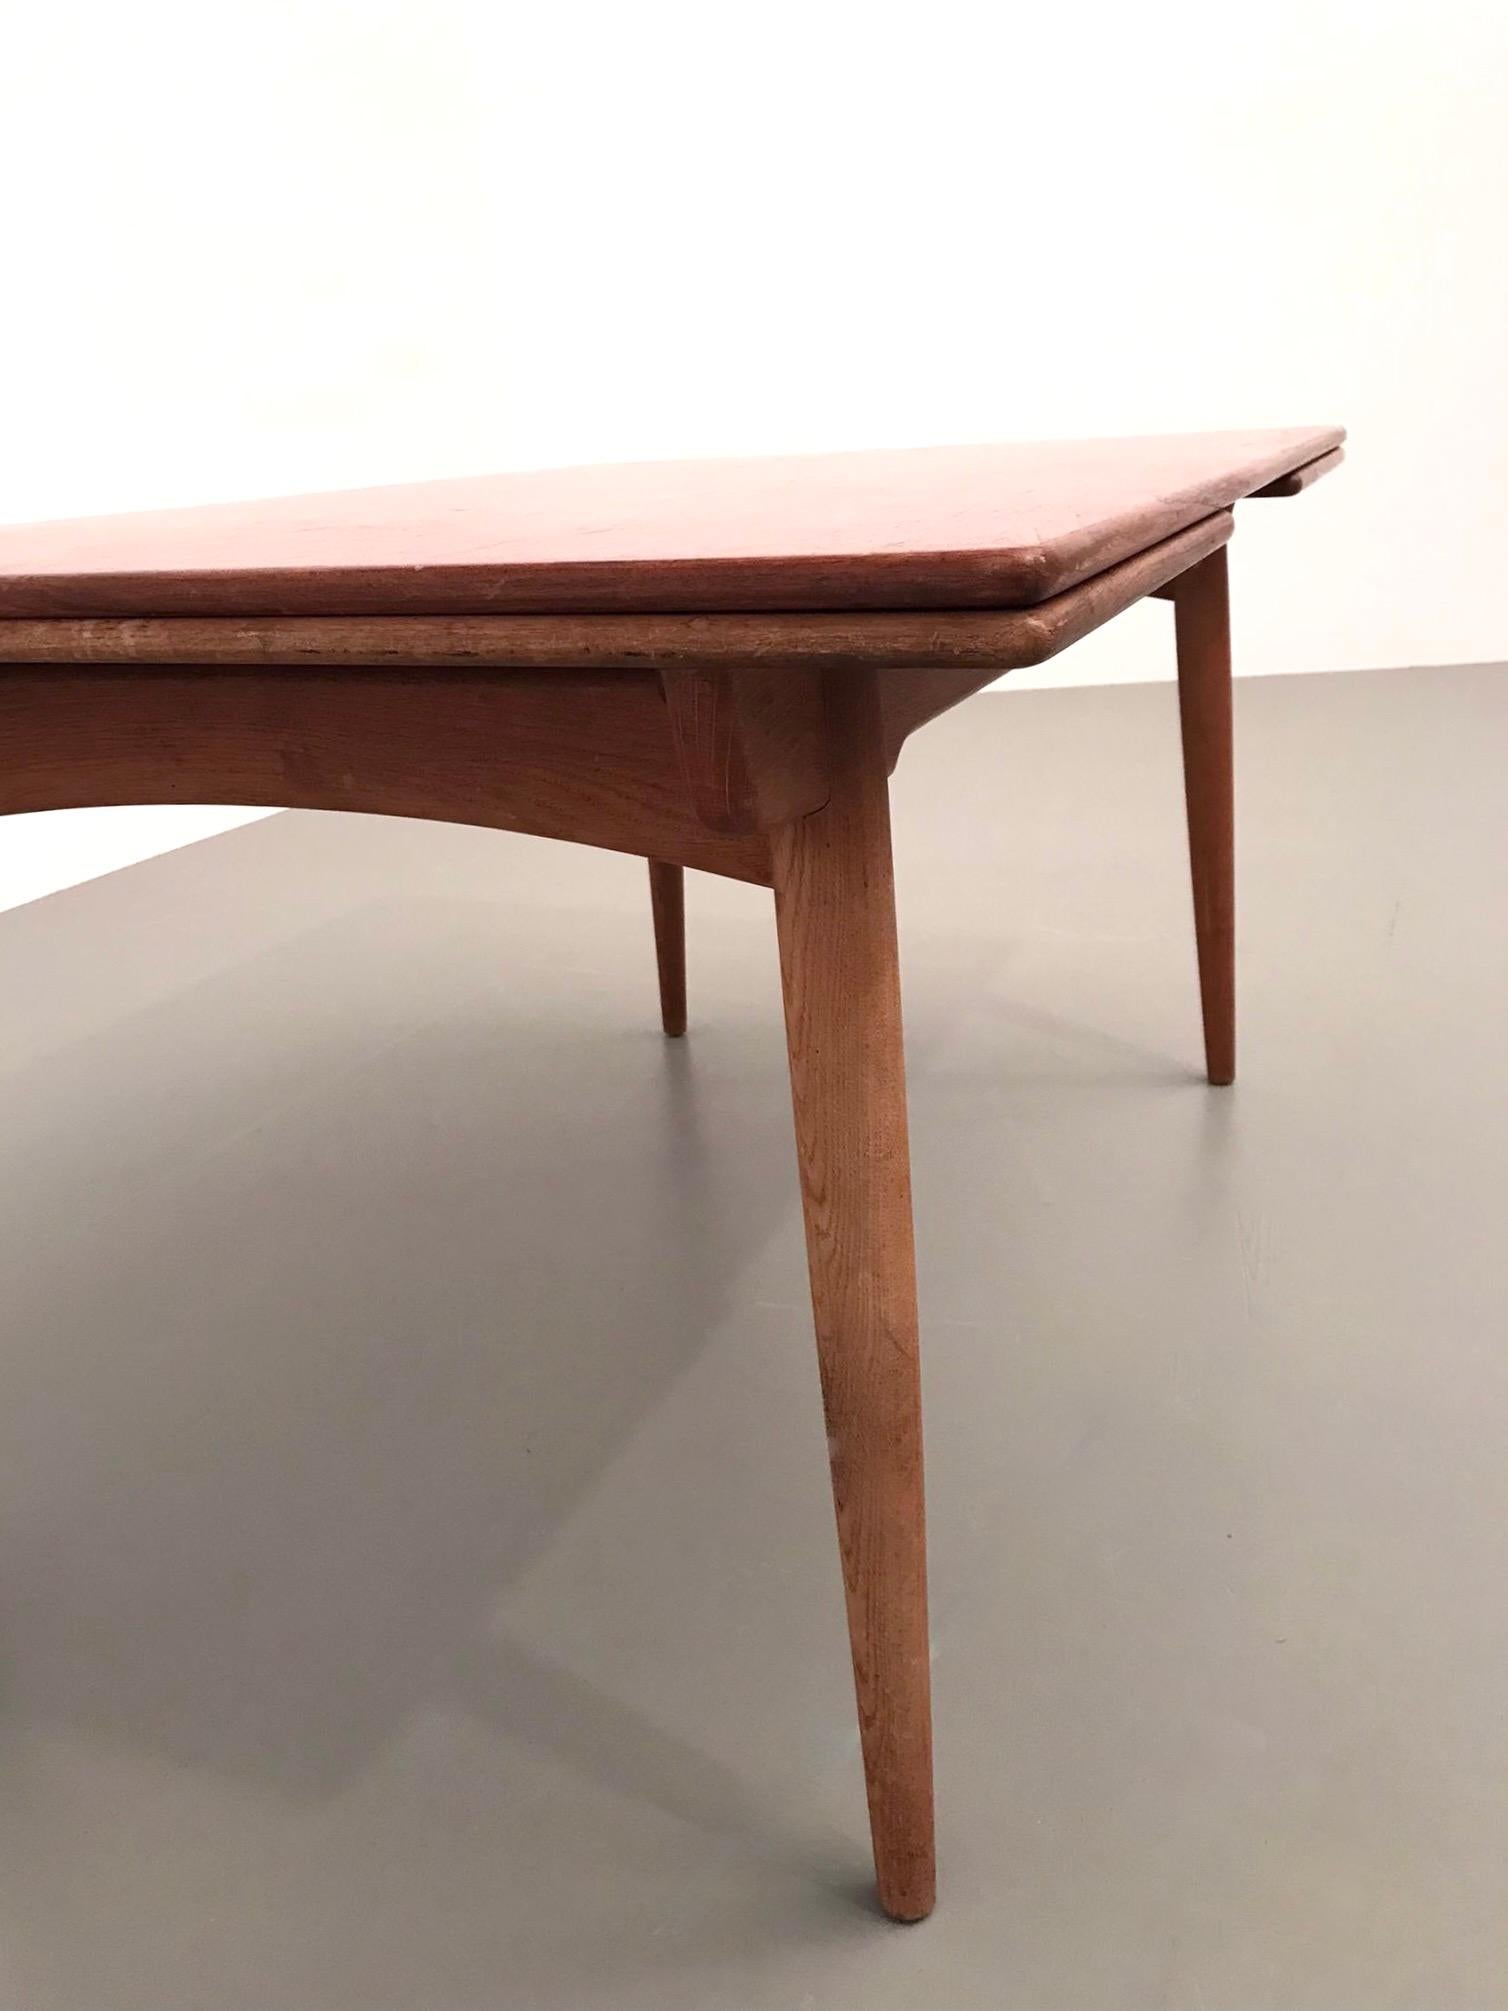 Dining Table AT 312 by Hans Wegner for Andreas Tuck in Oak, Denmark, 1960's For Sale 5